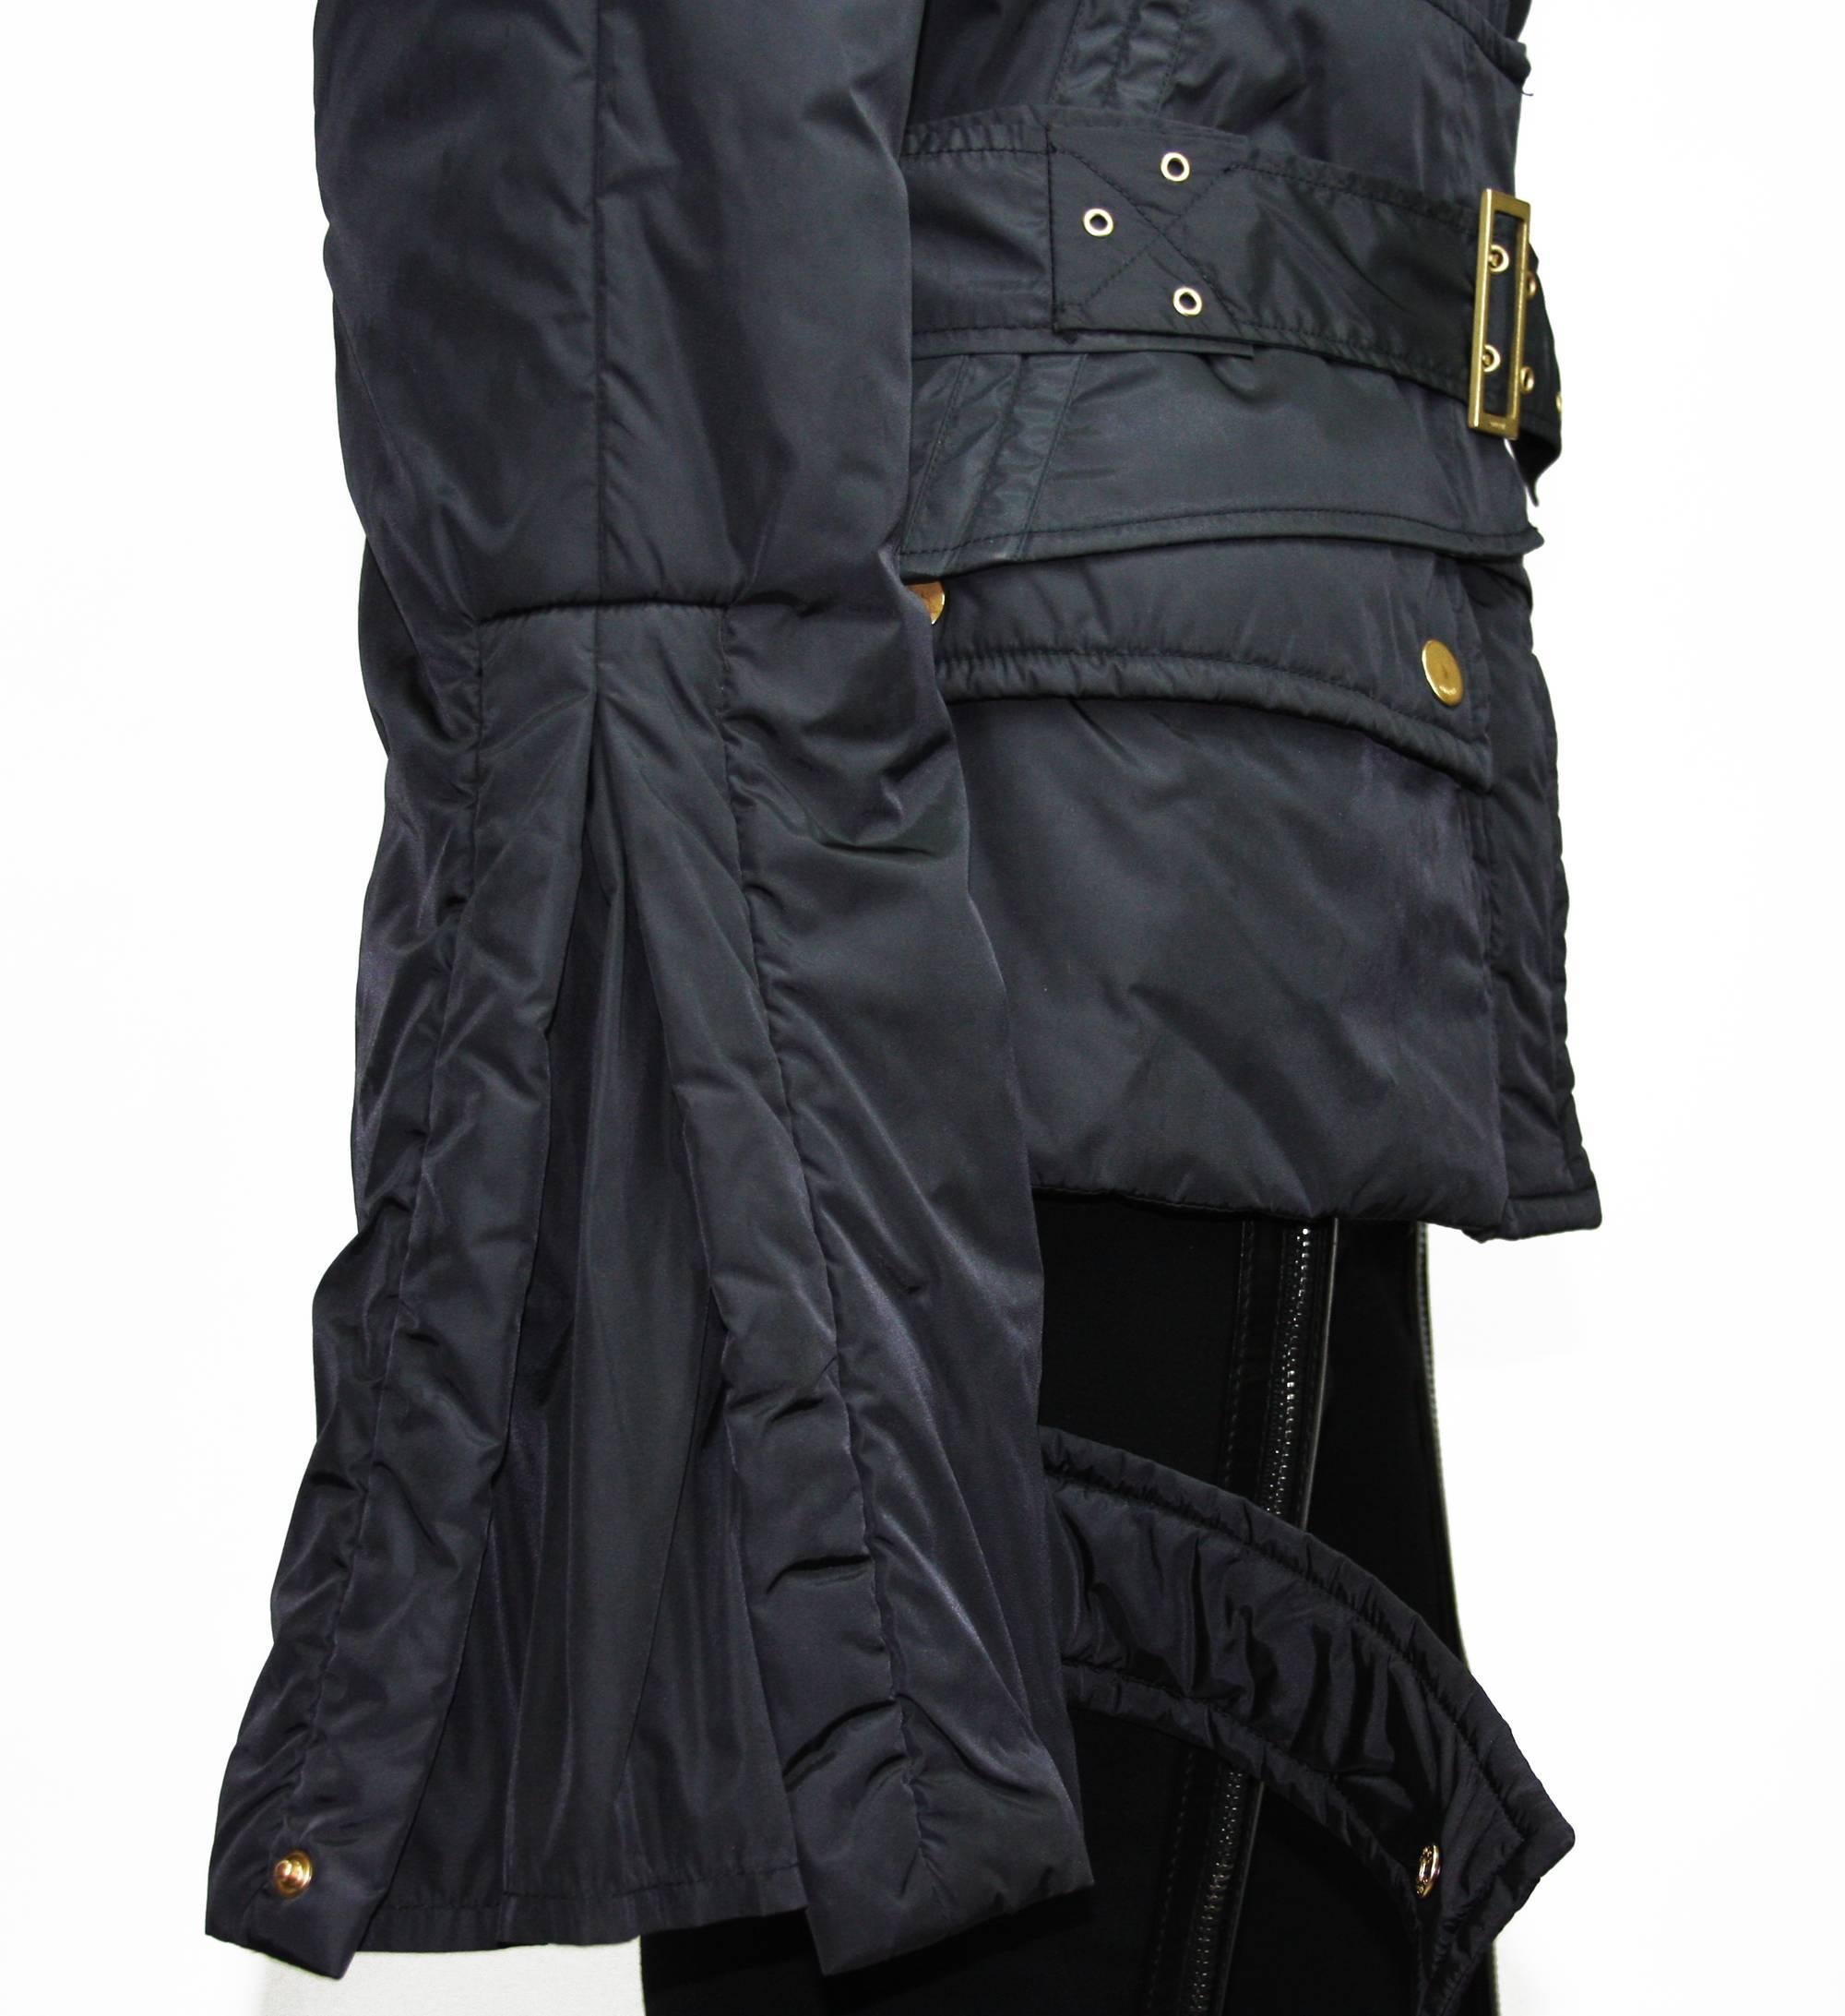 TOM FORD for GUCCI F/W 2003 COLLECTION CORSET BELT BLACK JACKET 46 - 8/10 1